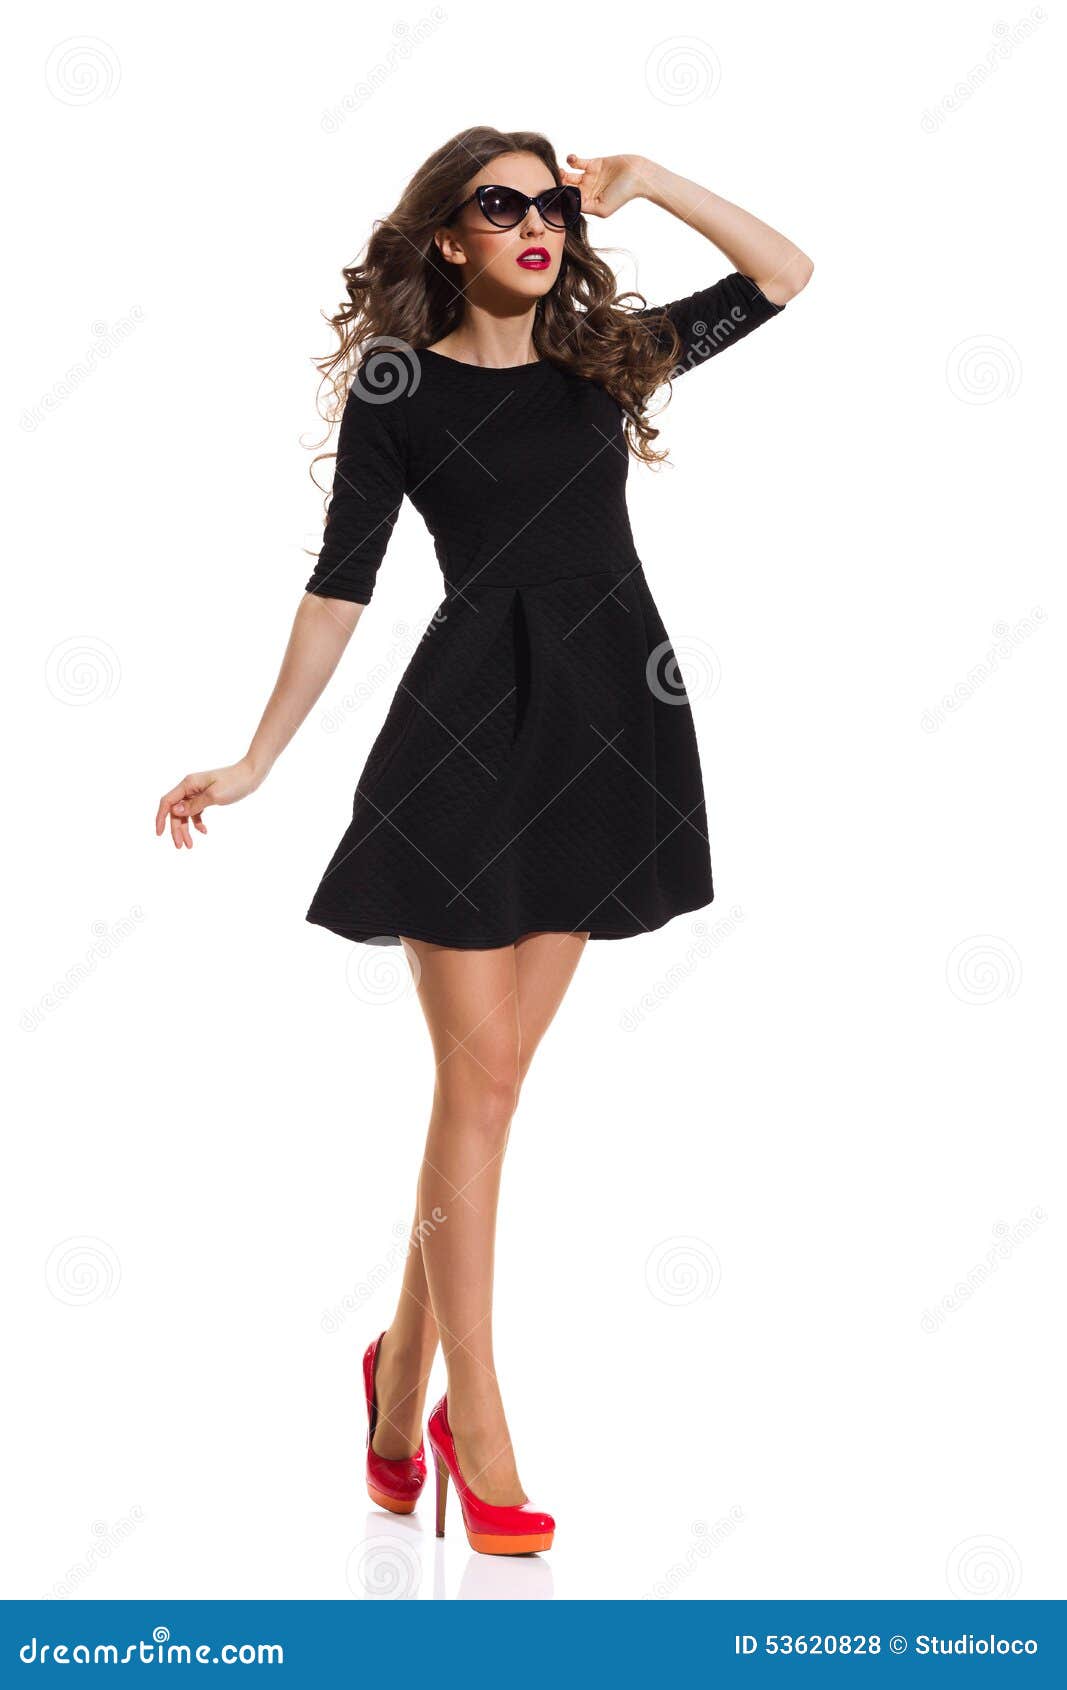 Fashion Model In Black Mini Dress And Red High Heels Stock